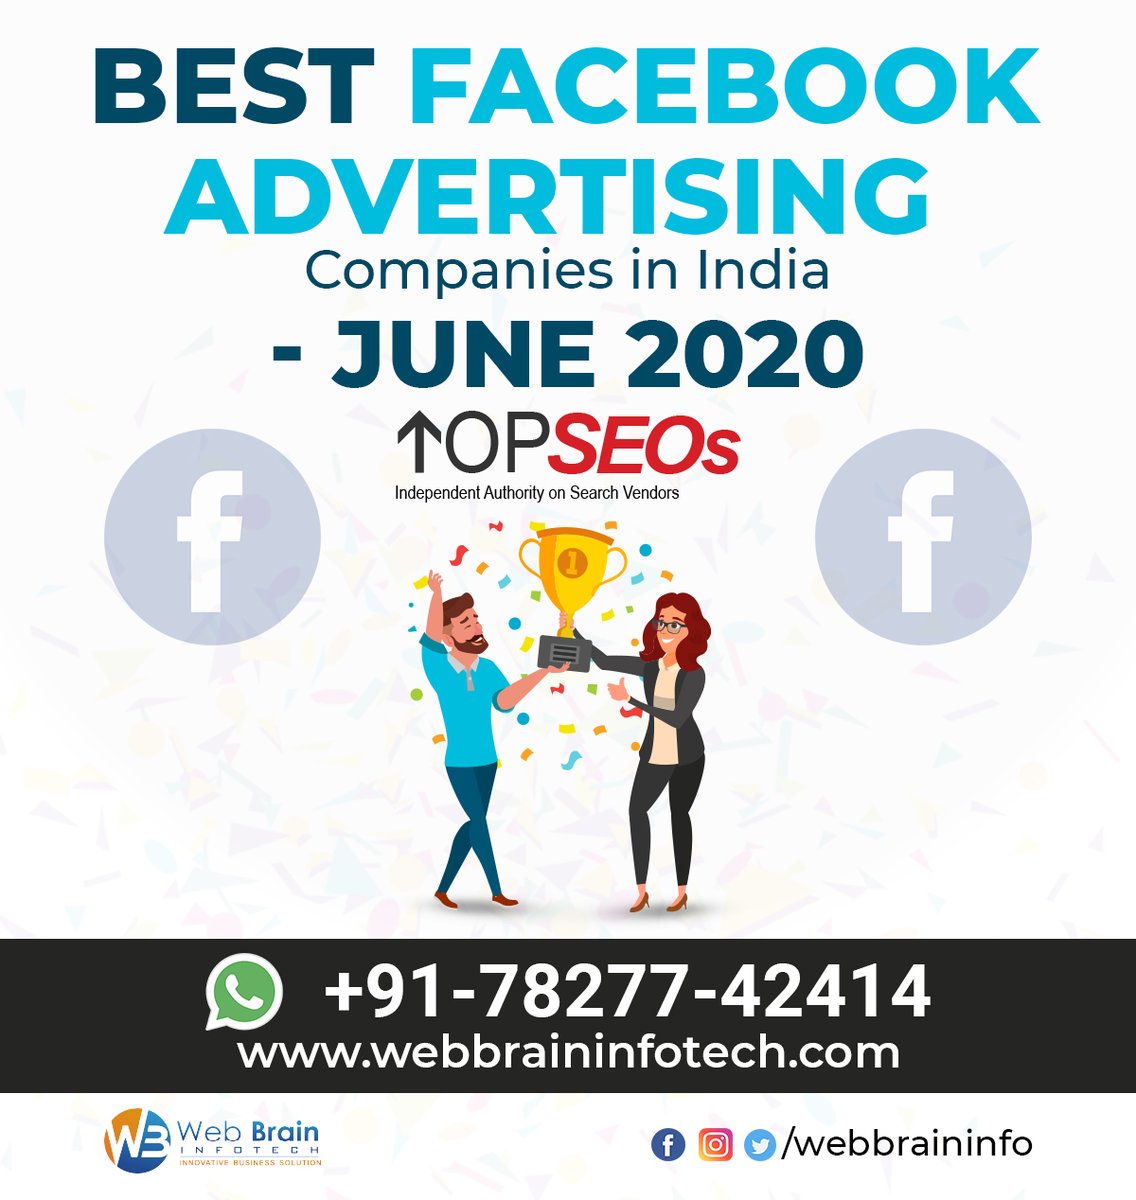 We are proud to #announce that we have been recognized as 'Best Facebook Advertising Companies in India - June 2020' by 'TopSEOs'. We have won this #award/ #recognition 2nd consecutive times. We help with #GoogleAdWords, #Facebookadvertisements, #PPCcampaigns, and #displayads.